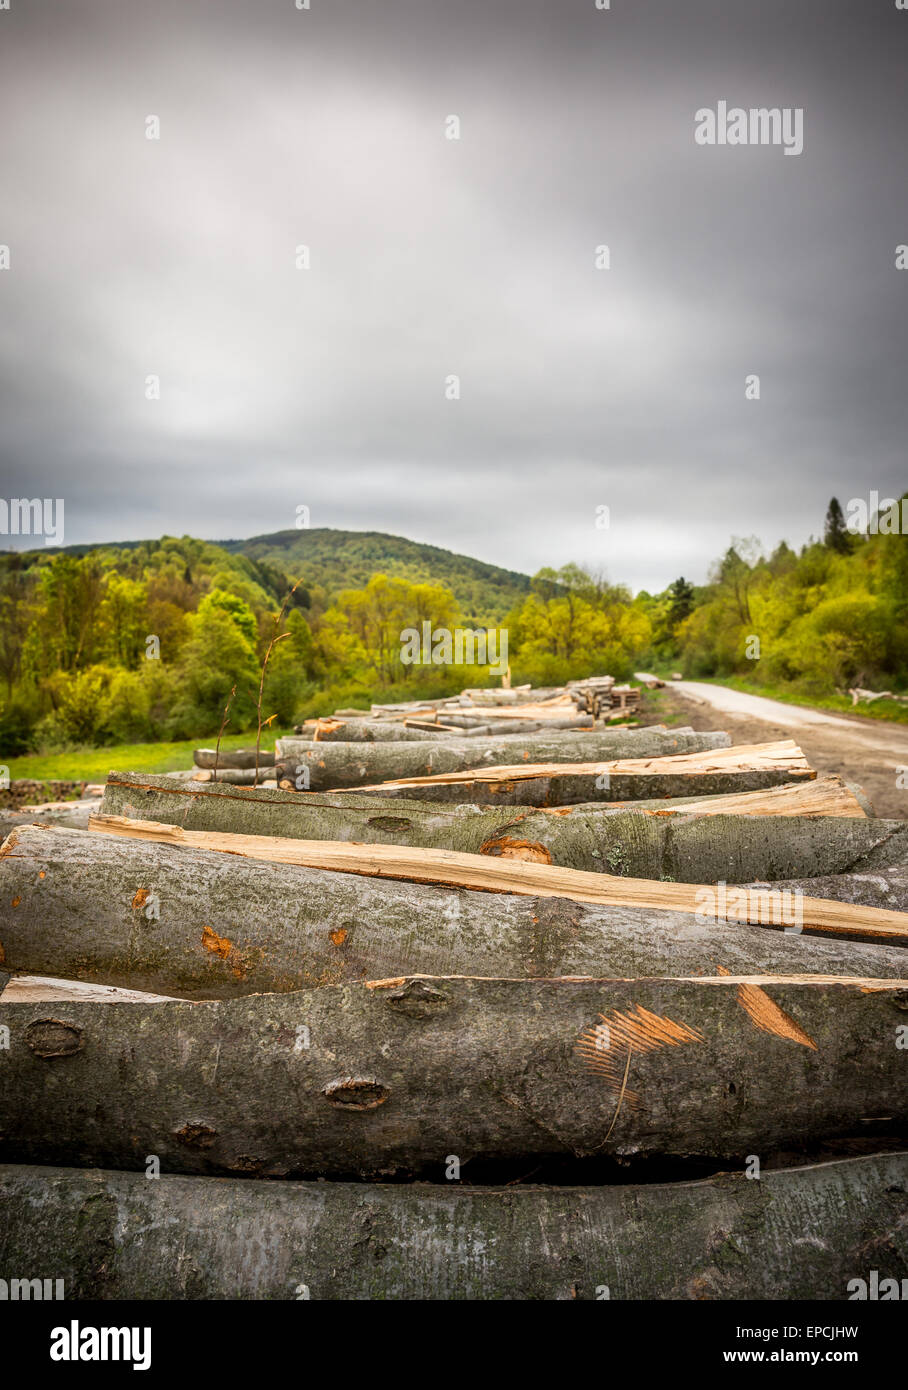 Rainy weather over rural landscape with wooden logs in the foreground Stock Photo